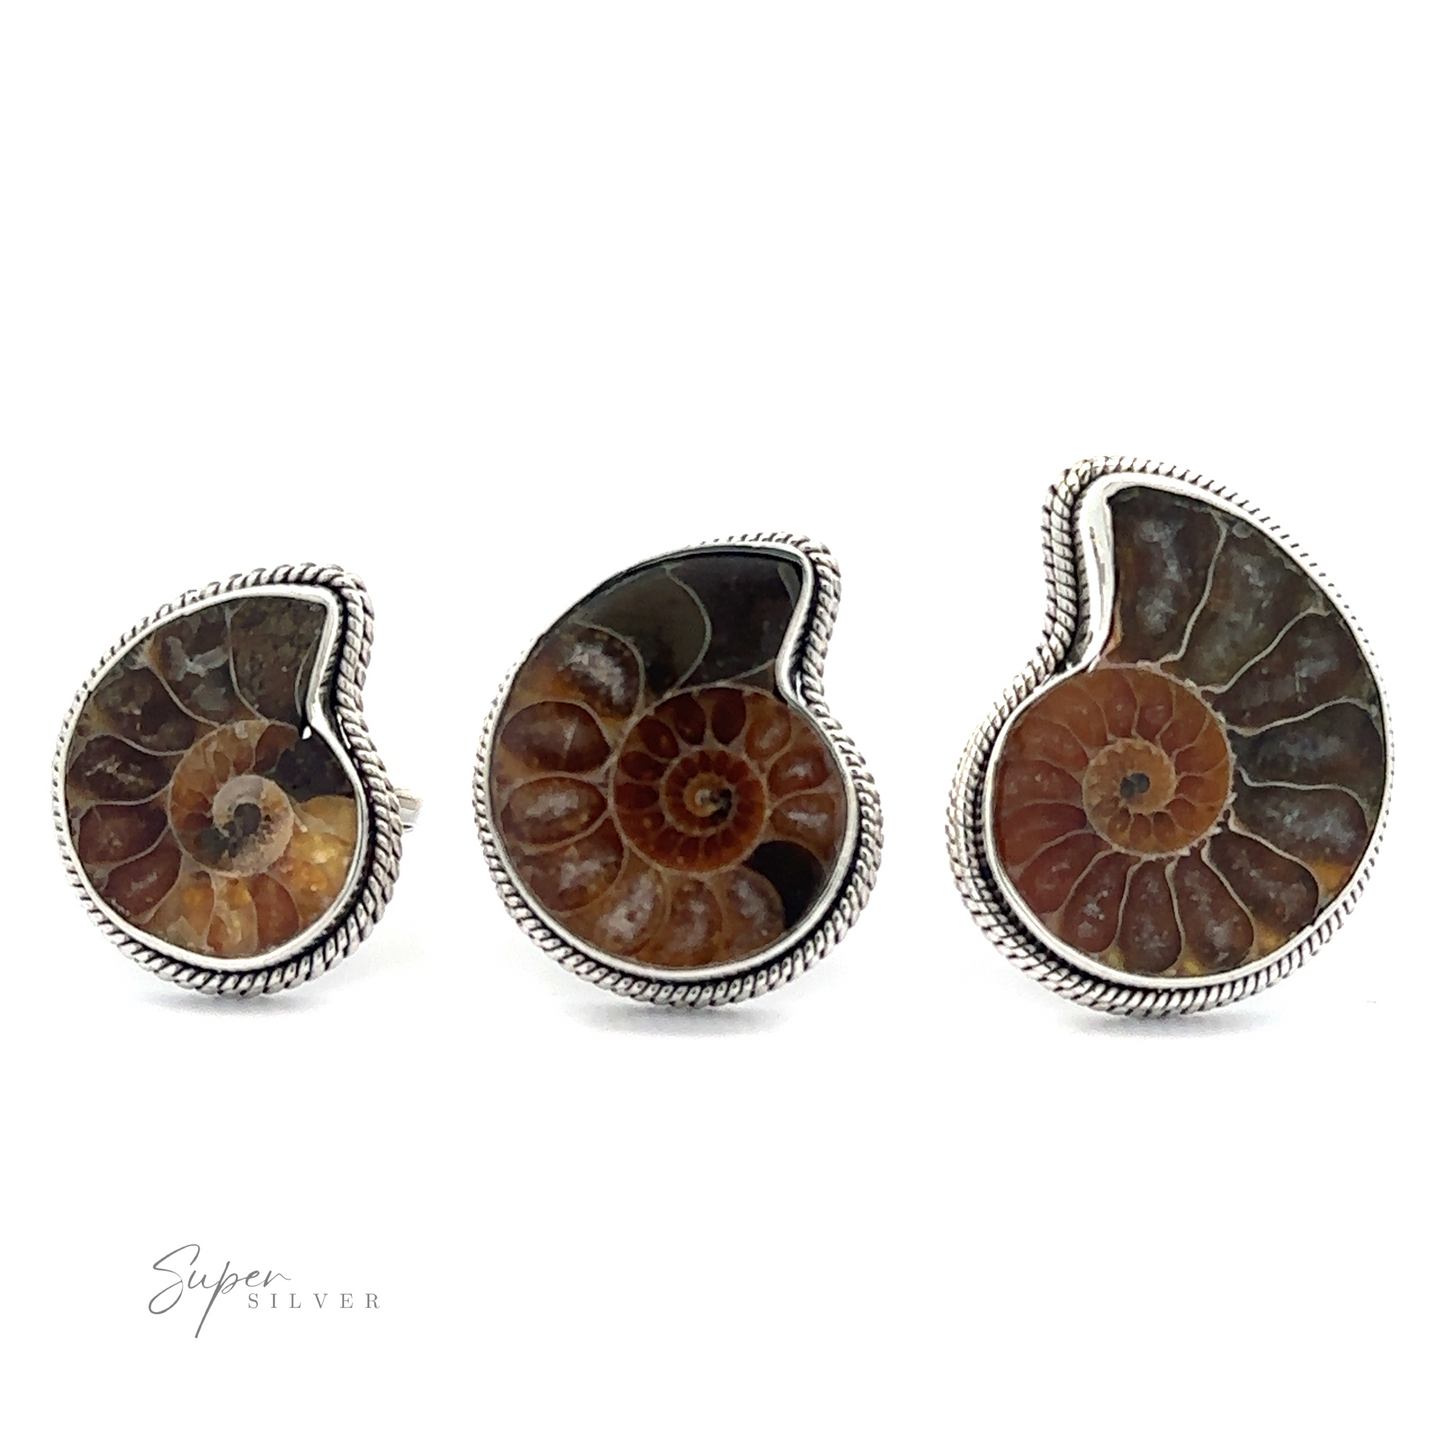 A set of three fossilized nautilus shell pieces set in sterling silver, displayed as Beautiful Nautilus Shell Ring jewelry.